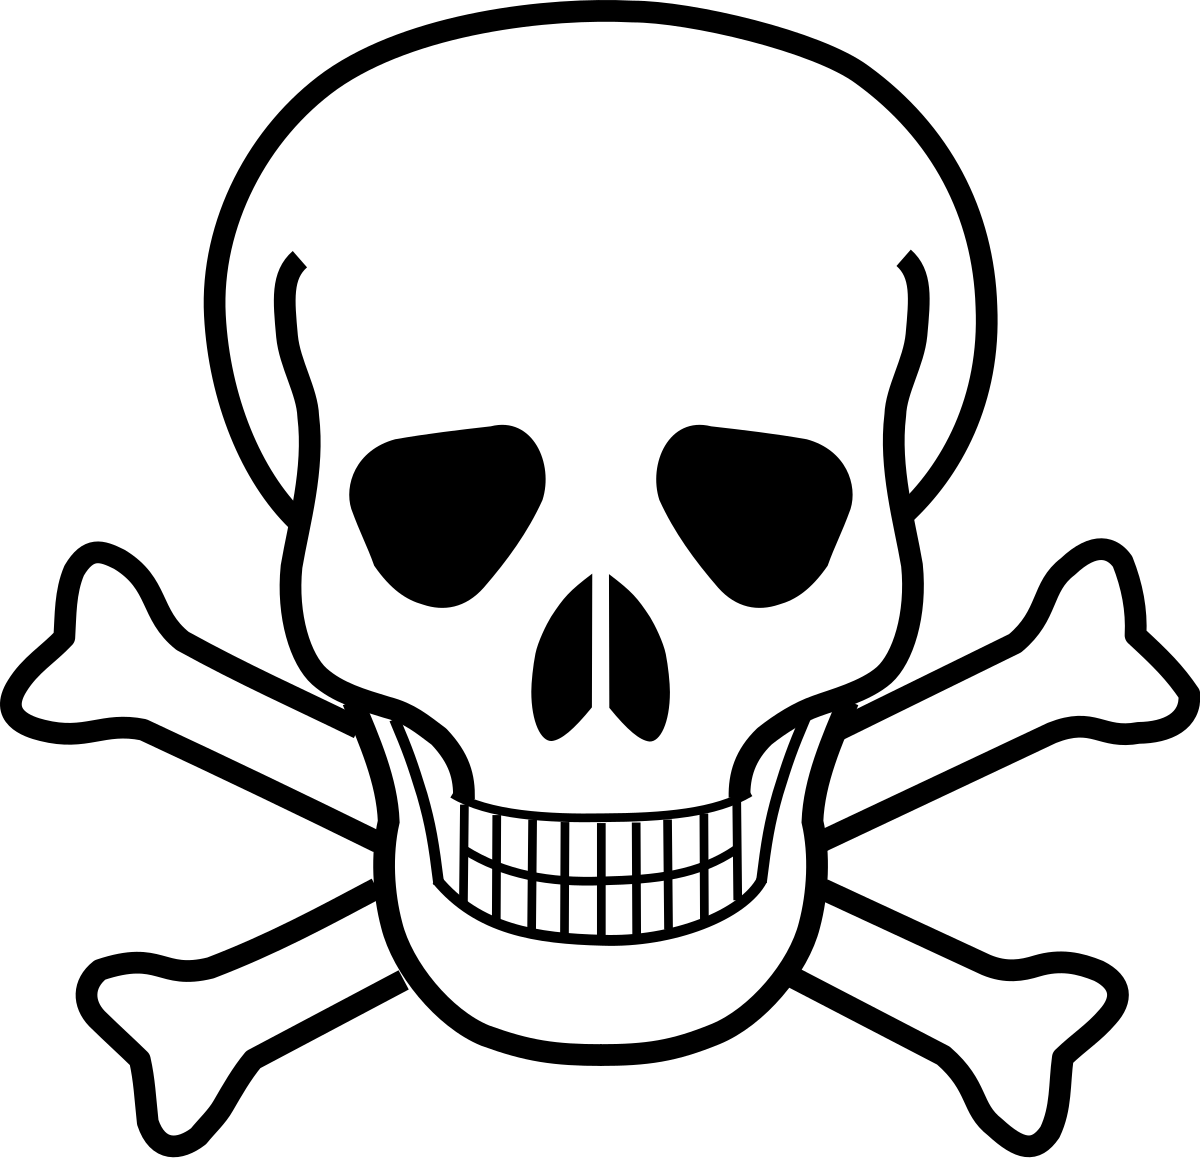 Download File:Death skull.svg - Wikimedia Commons